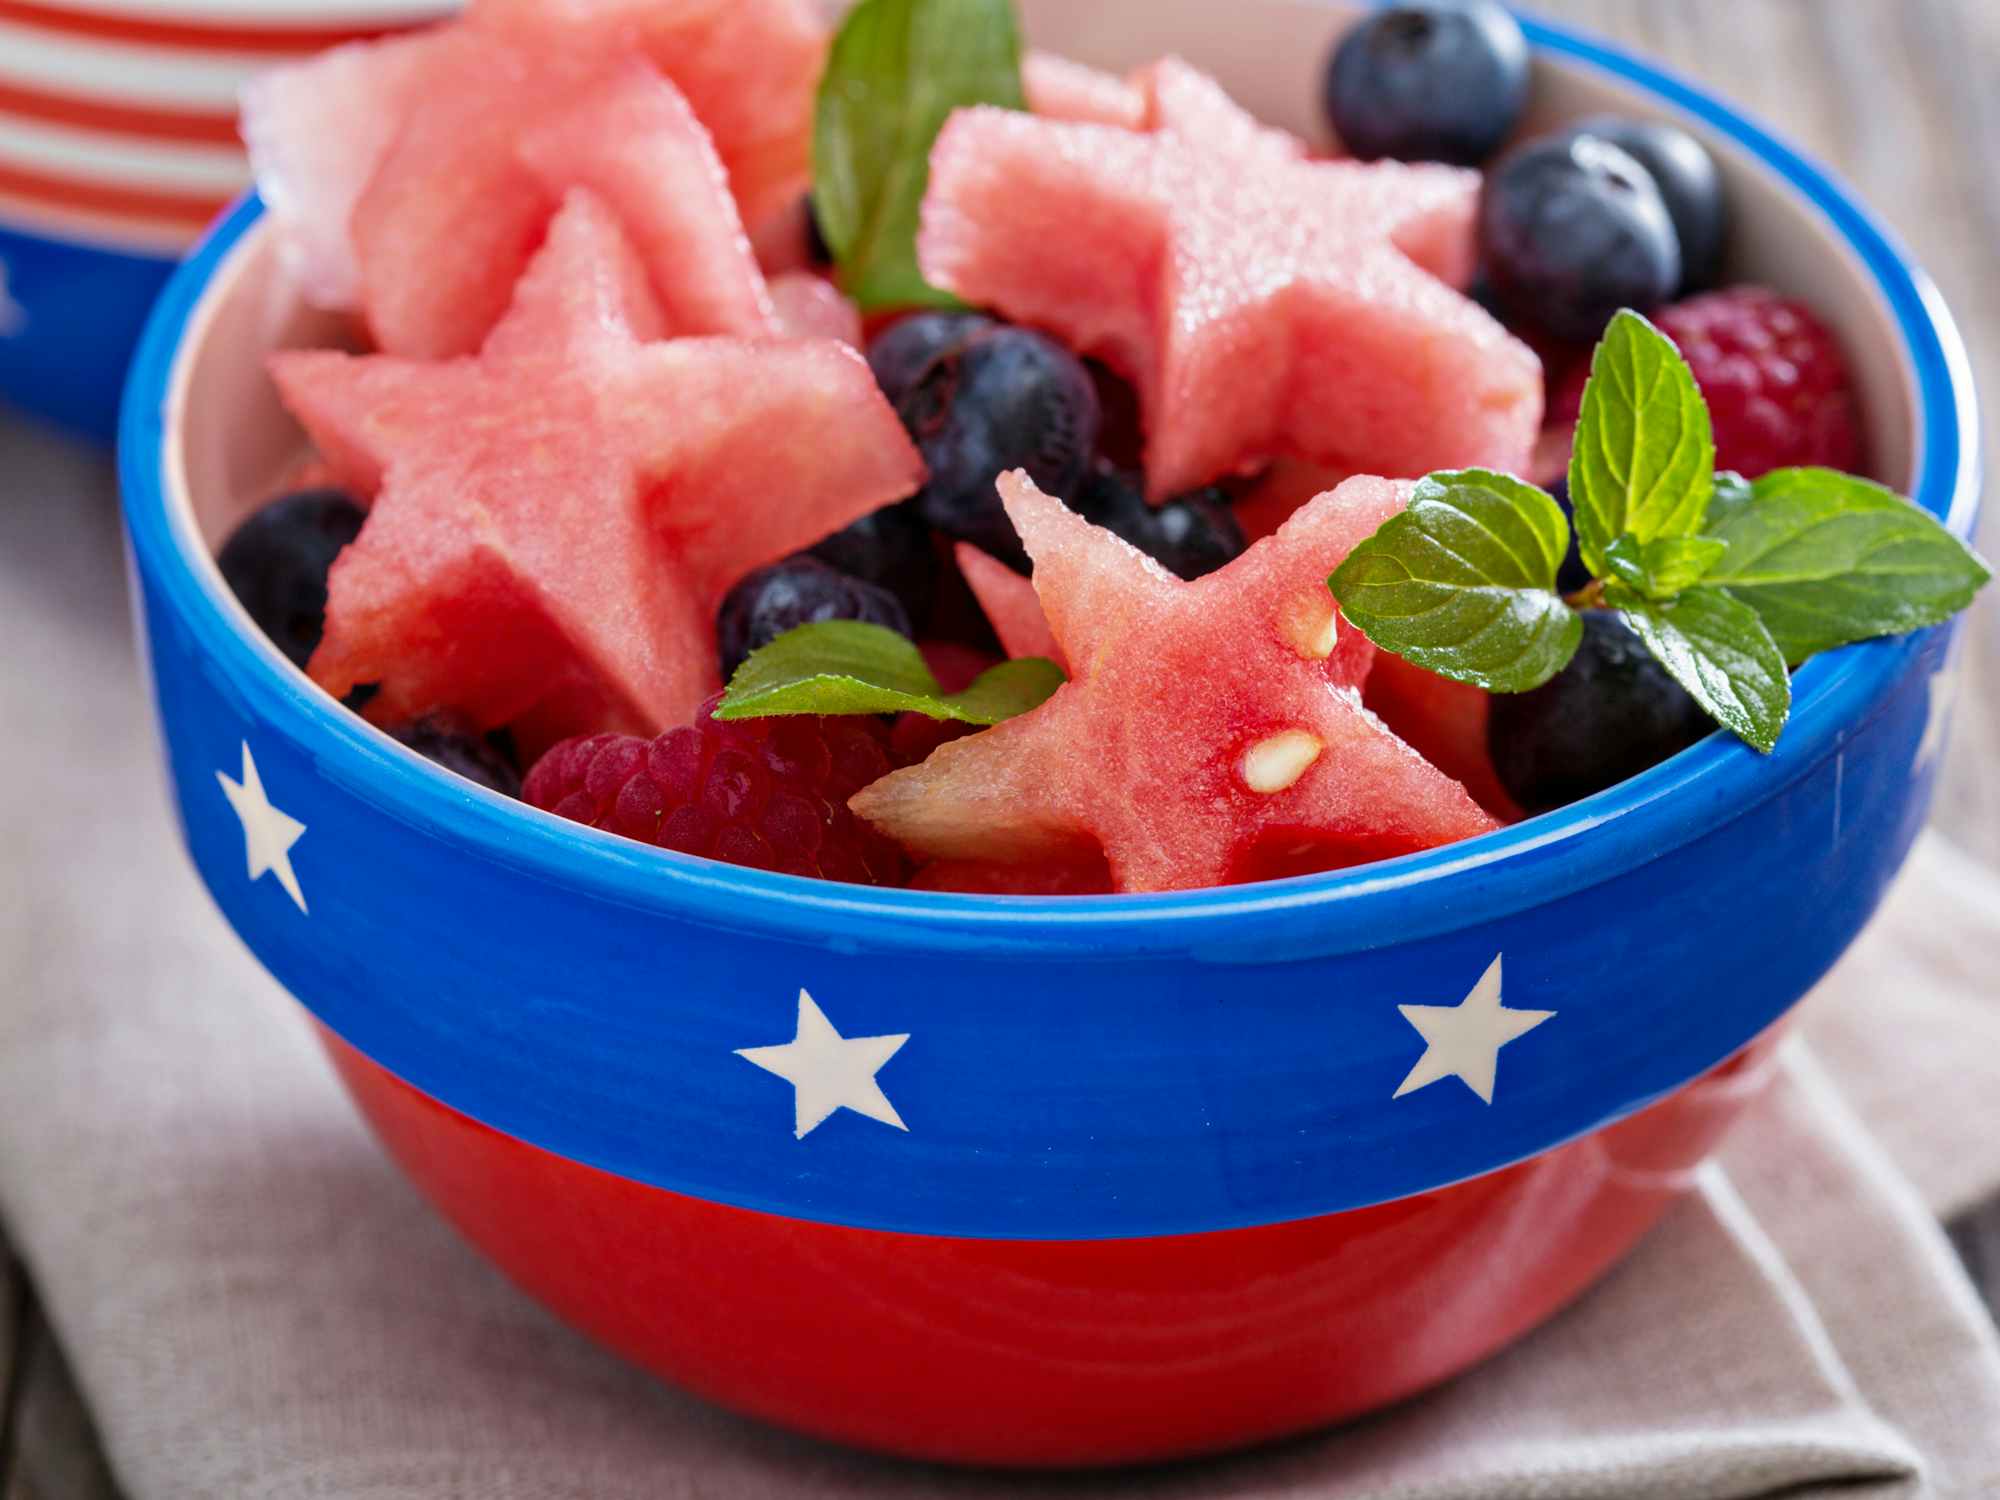 Fresh watermelon cut in star shape with blueberries